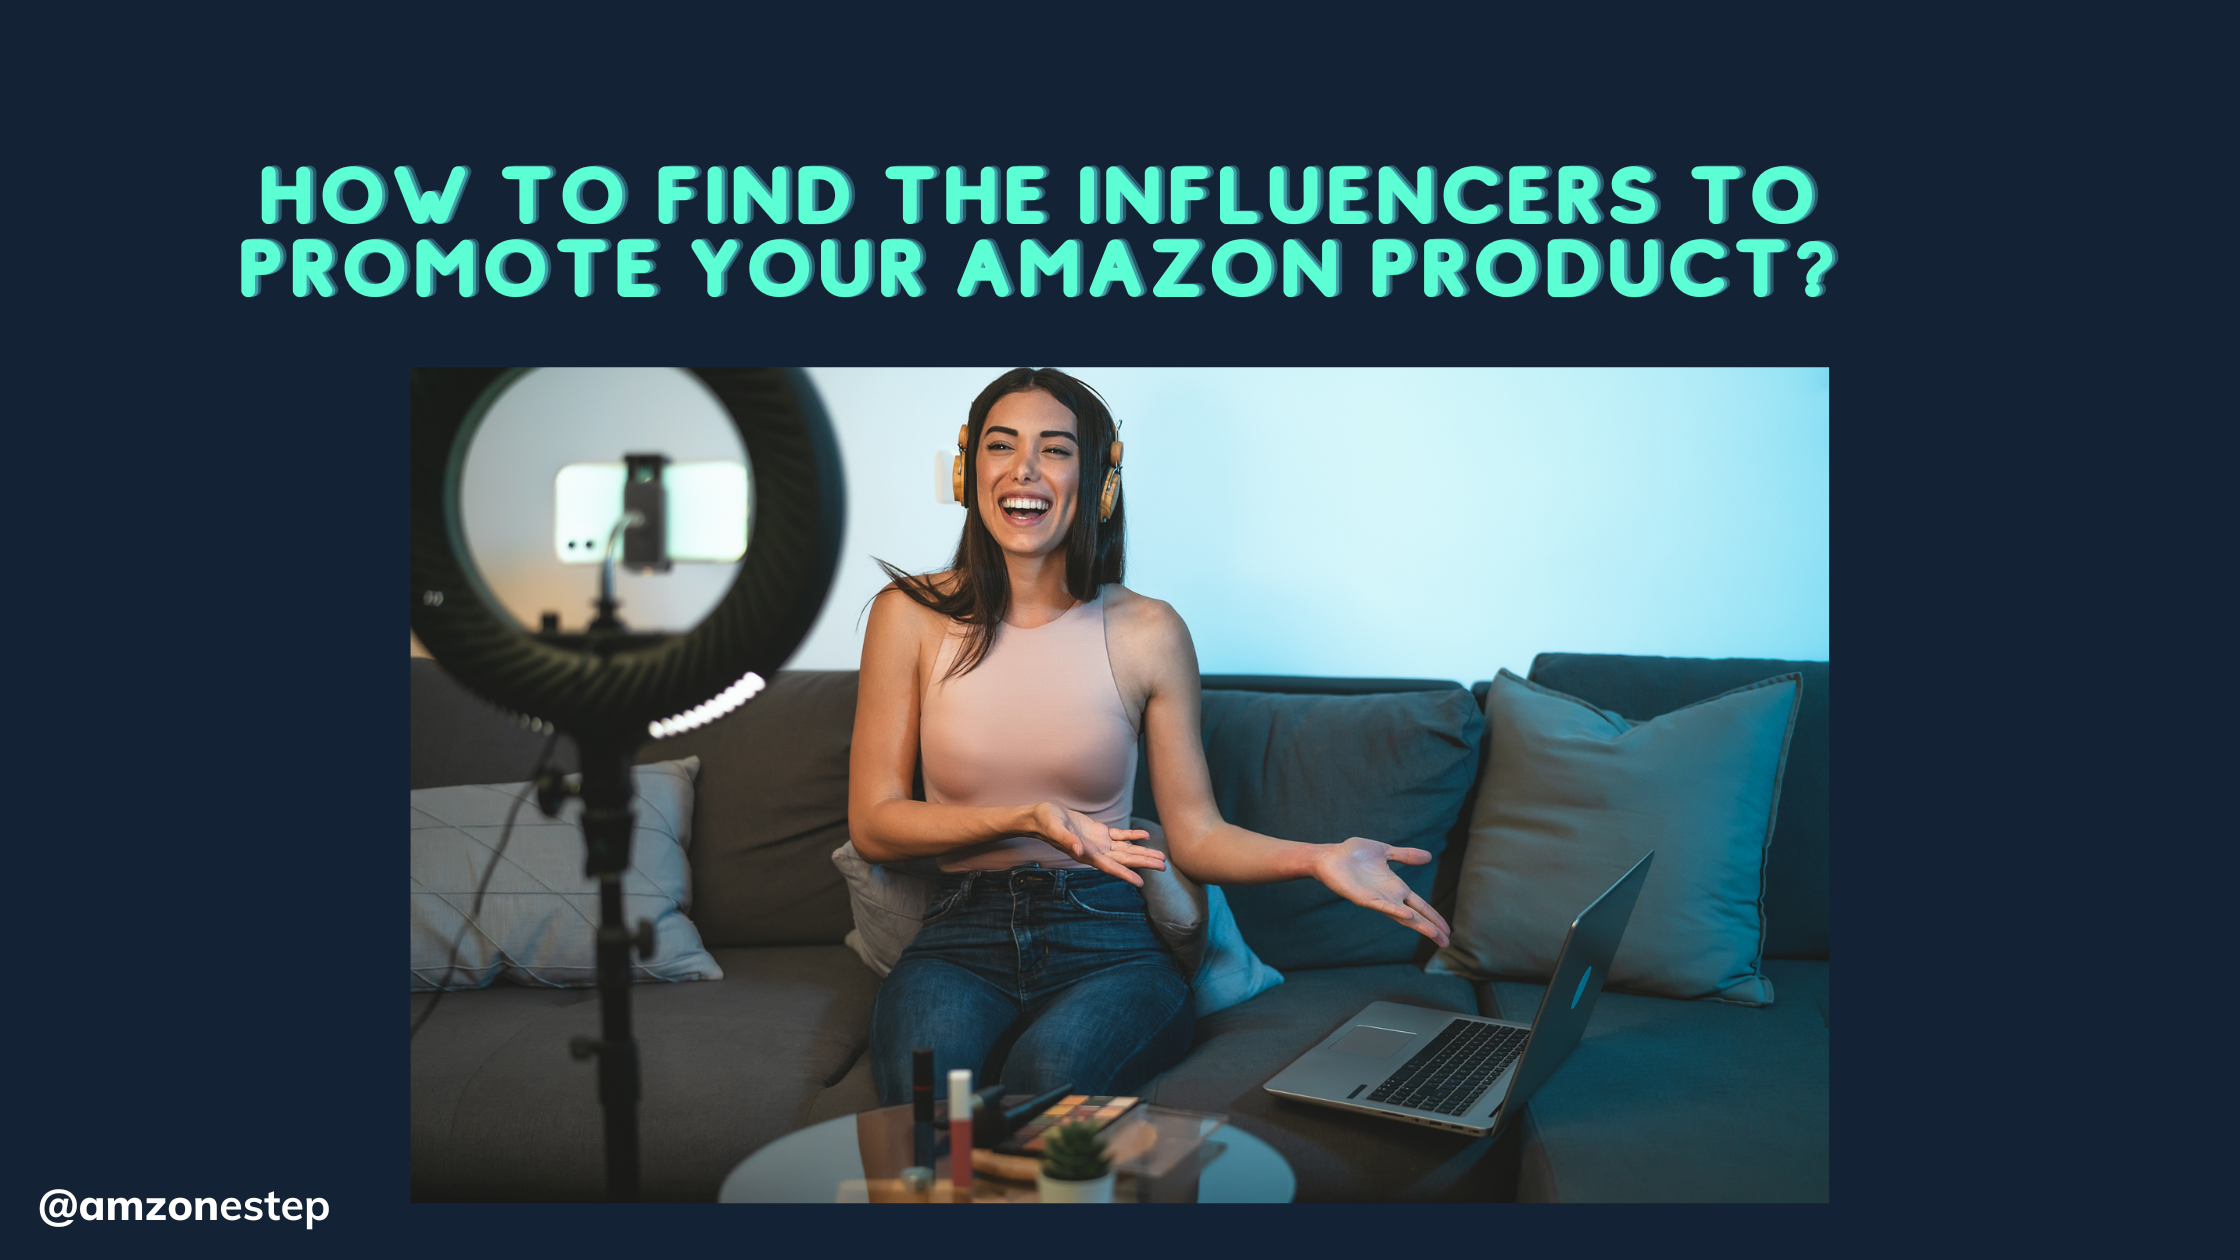 How To Find The Influencers To Promote Your Amazon Product?